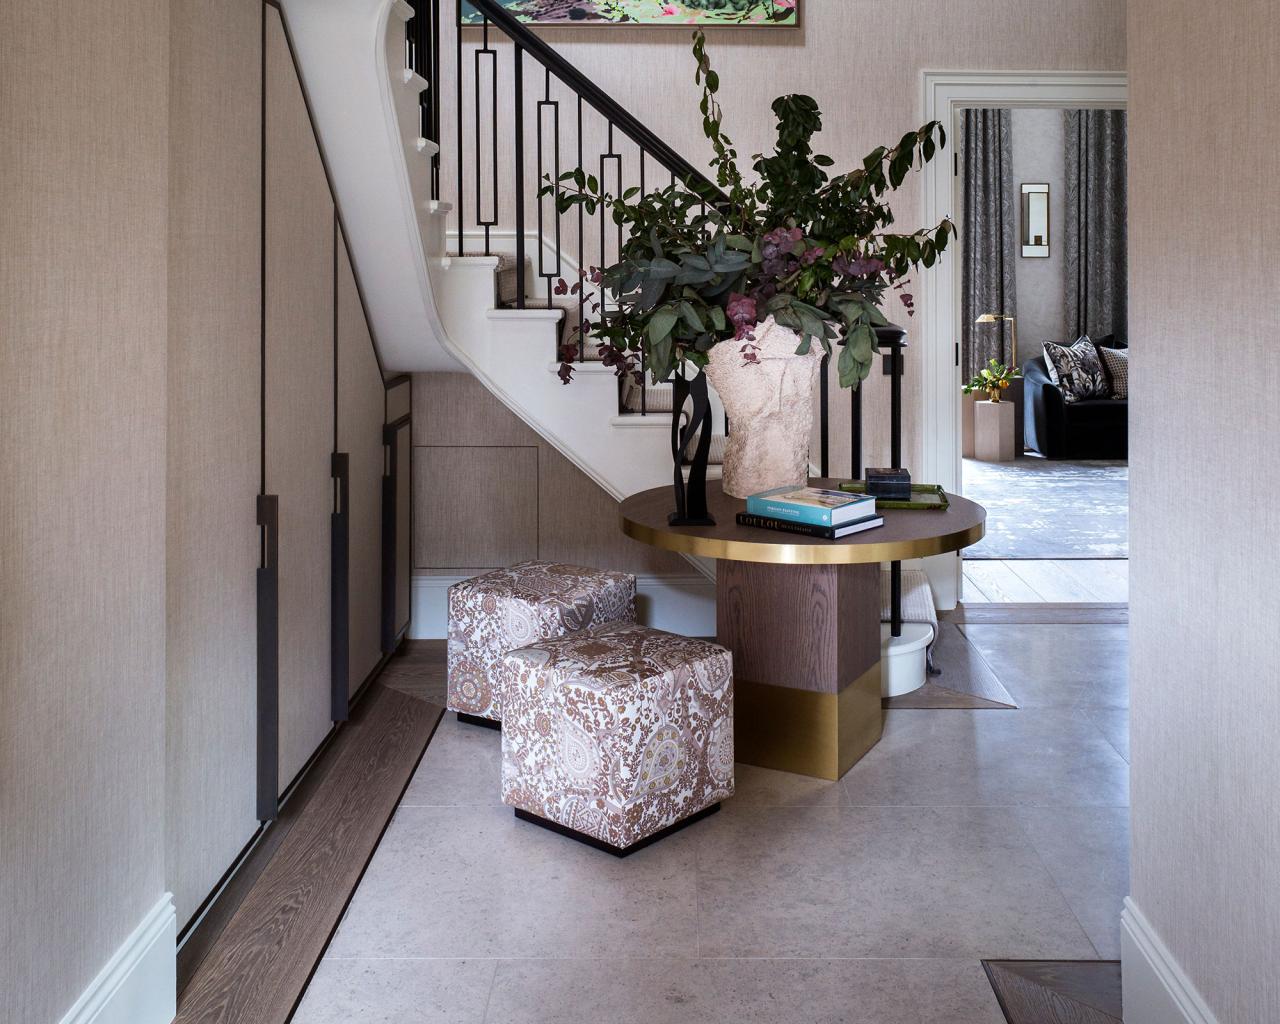 Narrow Hallway Ideas: 10 Essential Design Rules For Making A Long Space  Seem Wider |